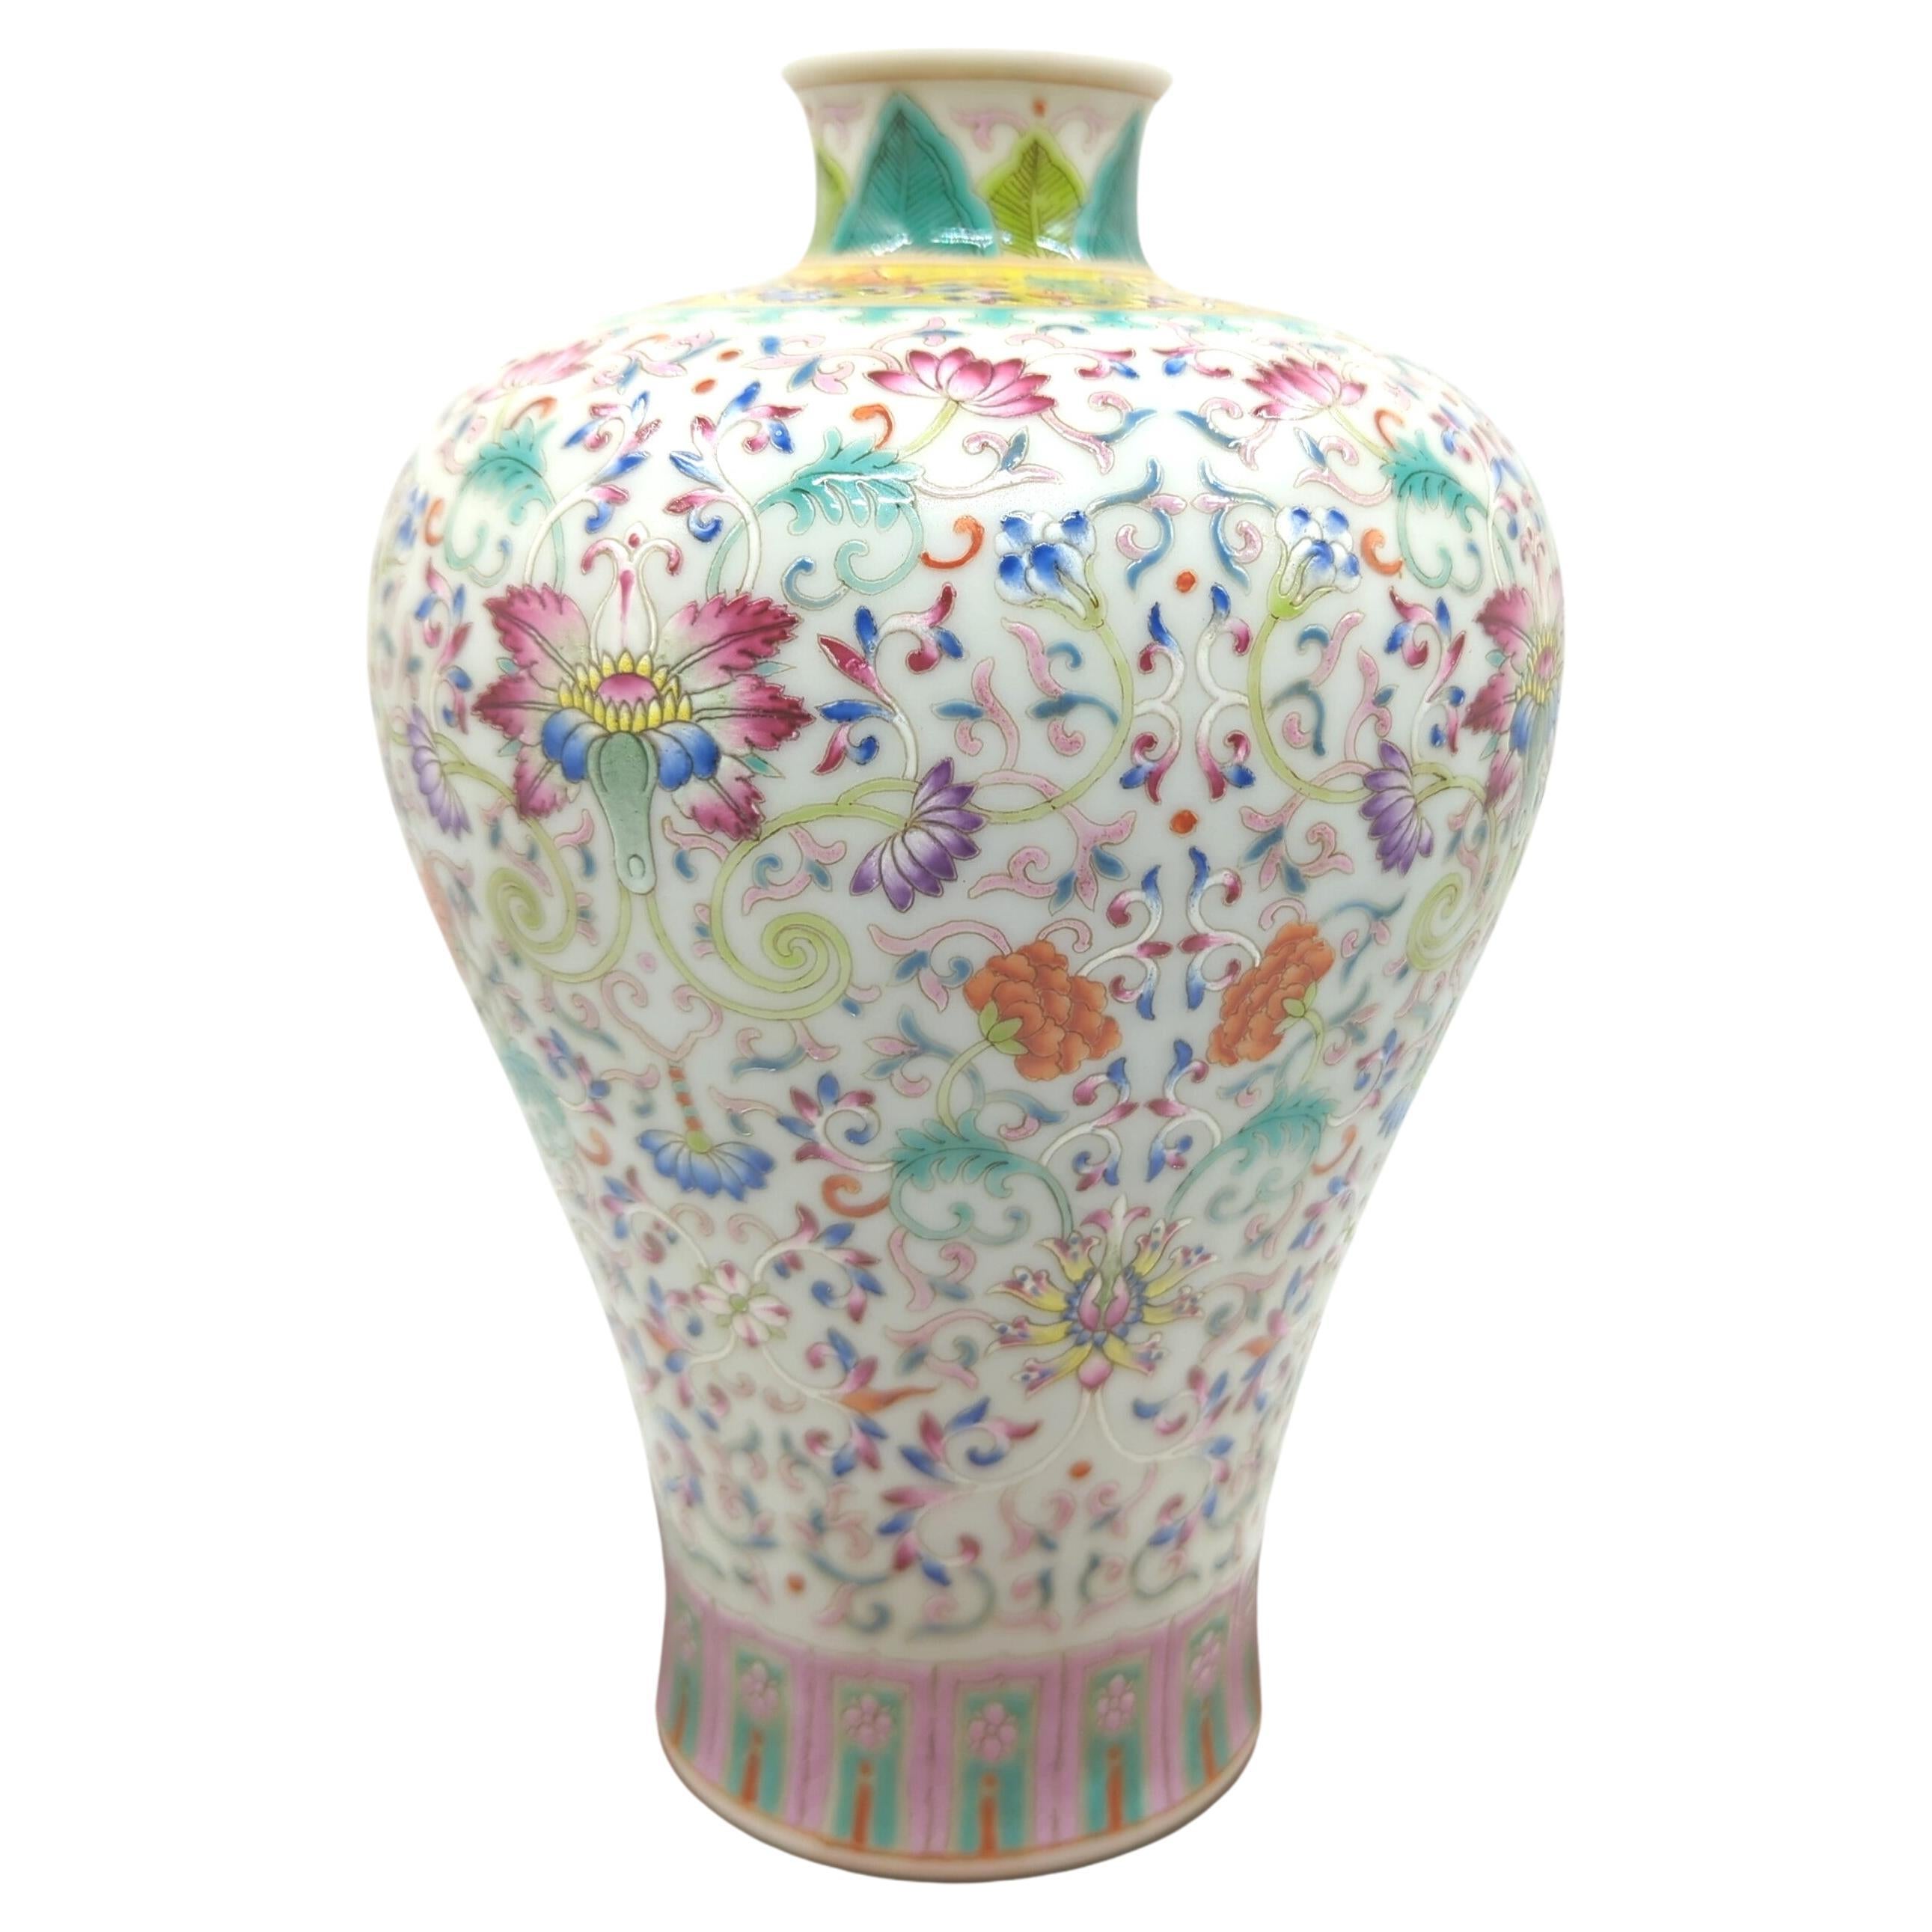 We are delighted to offer this exquisite early 20th-century Republic of China period Meiping vase, a remarkable example of the fencai famille rose technique. This vase stands as a testament to the unparalleled craftsmanship and artistic ingenuity of